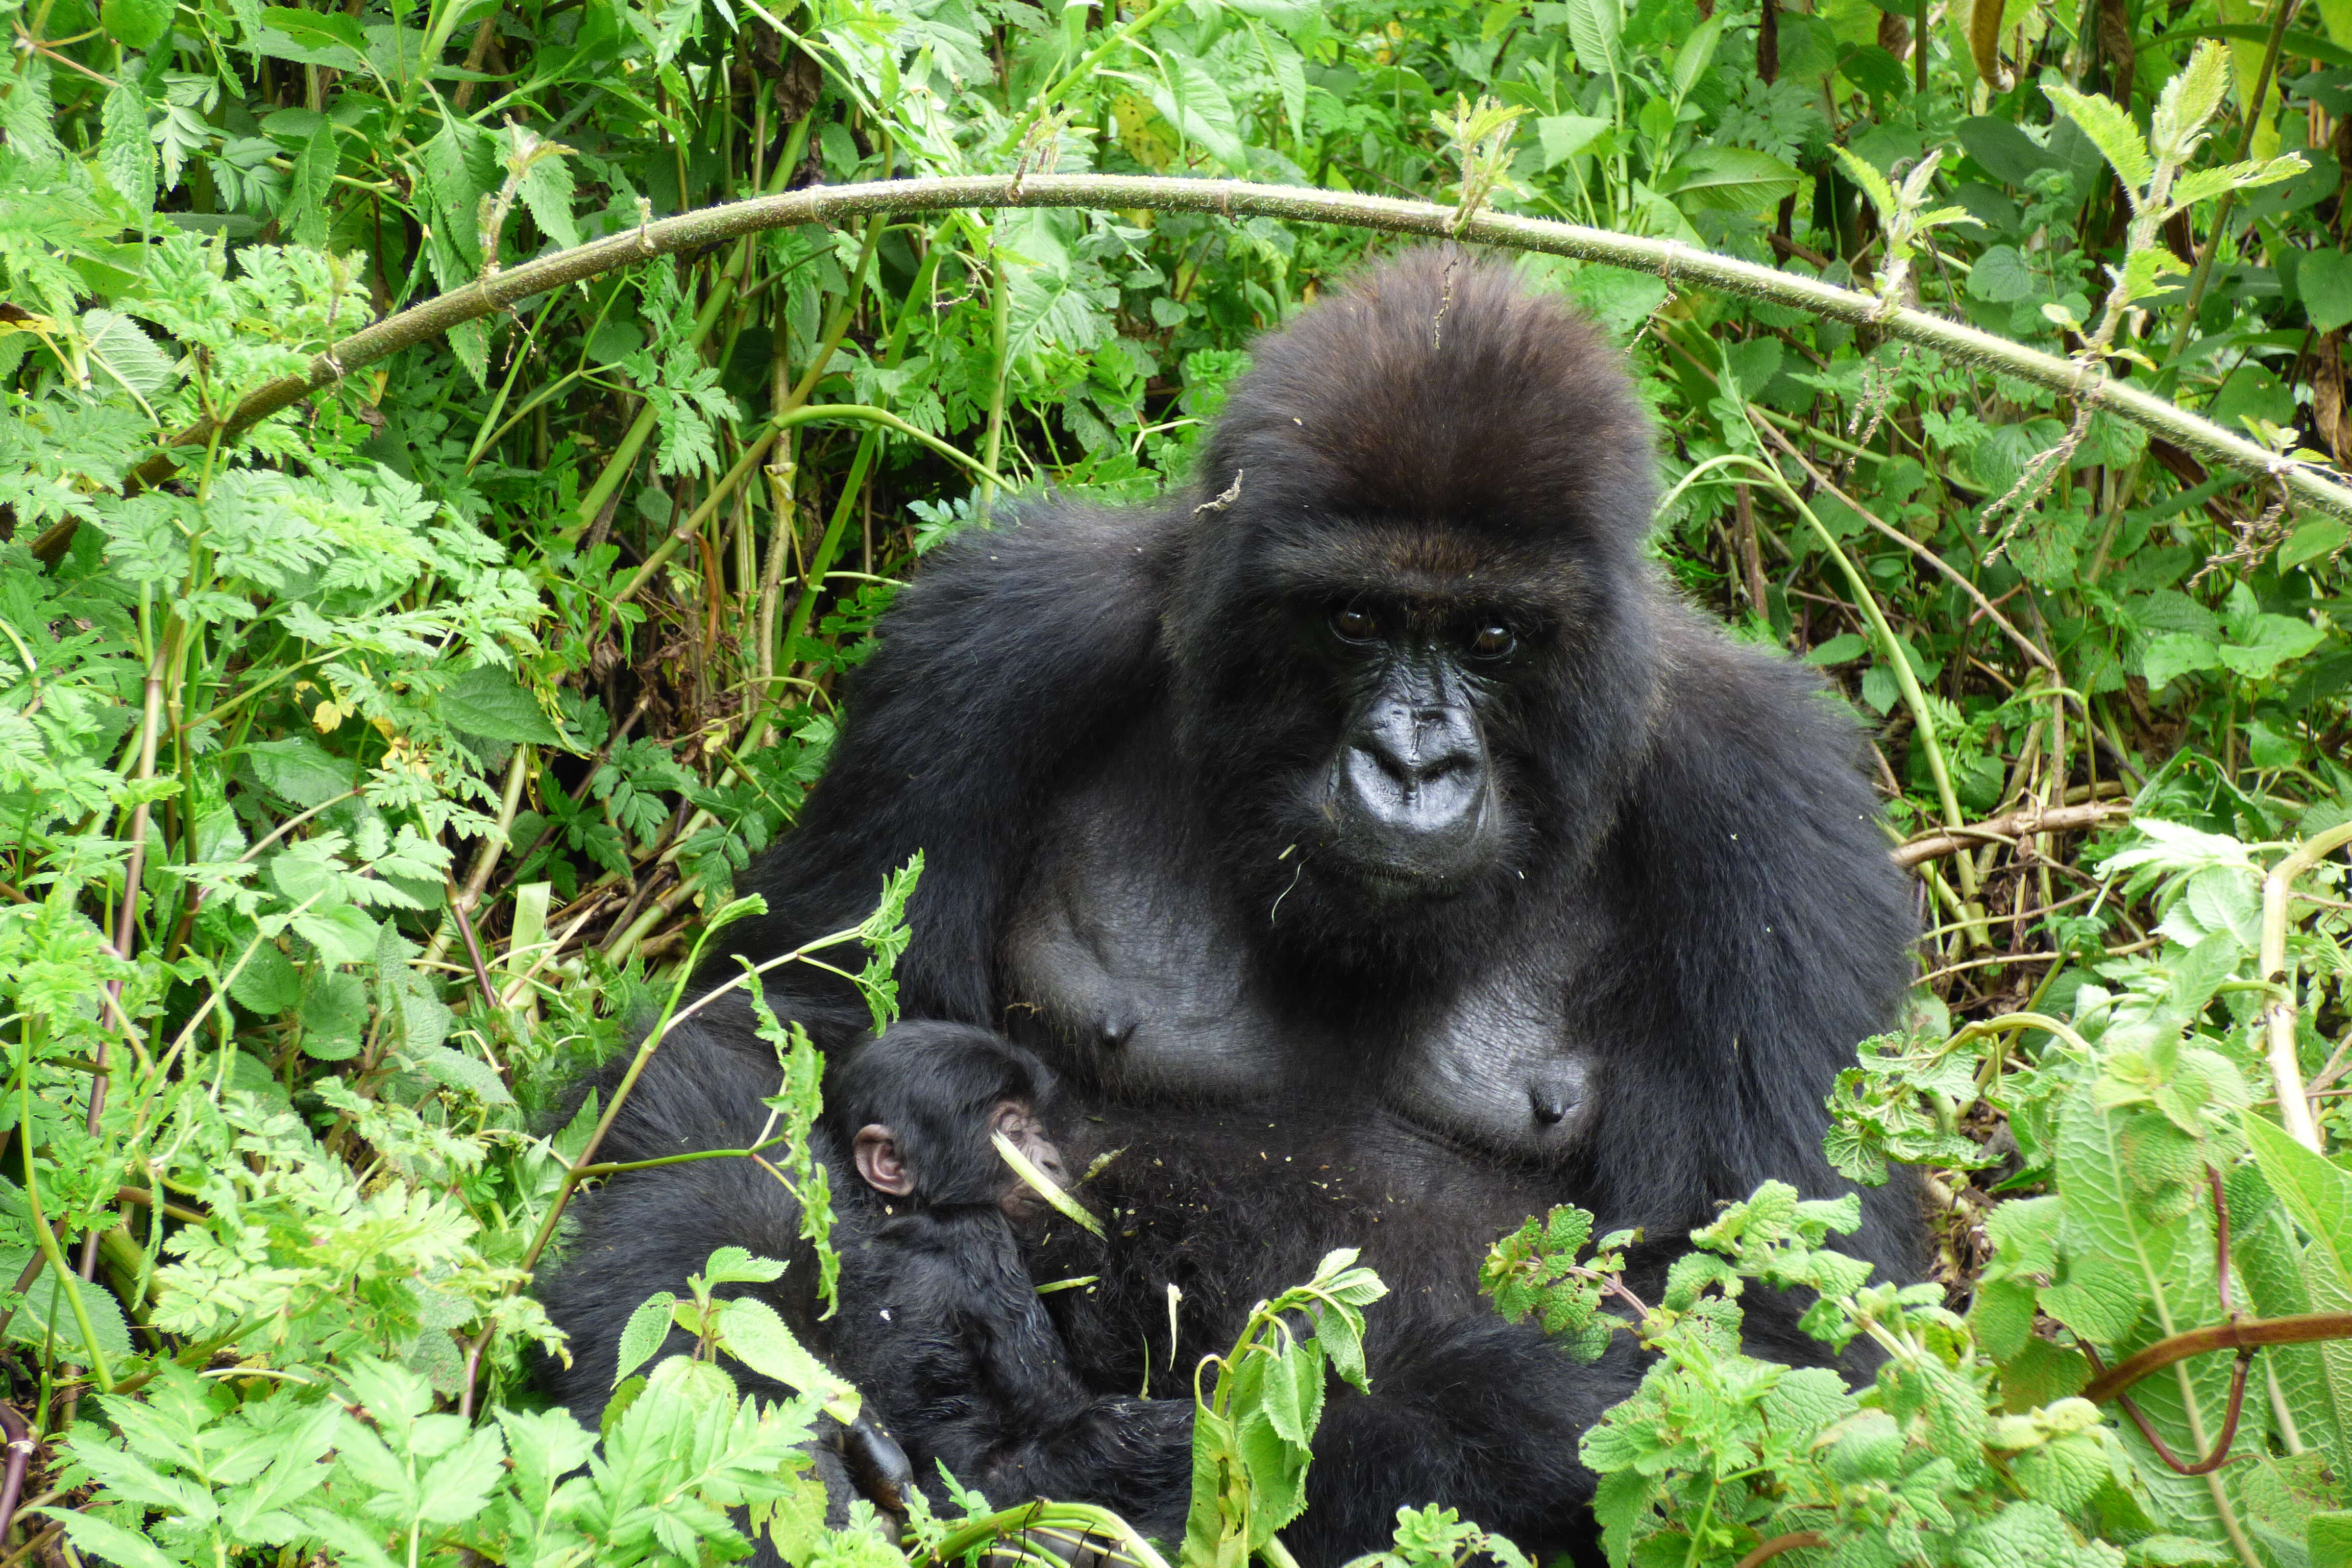 Mother gorilla and baby in Virunga National Park